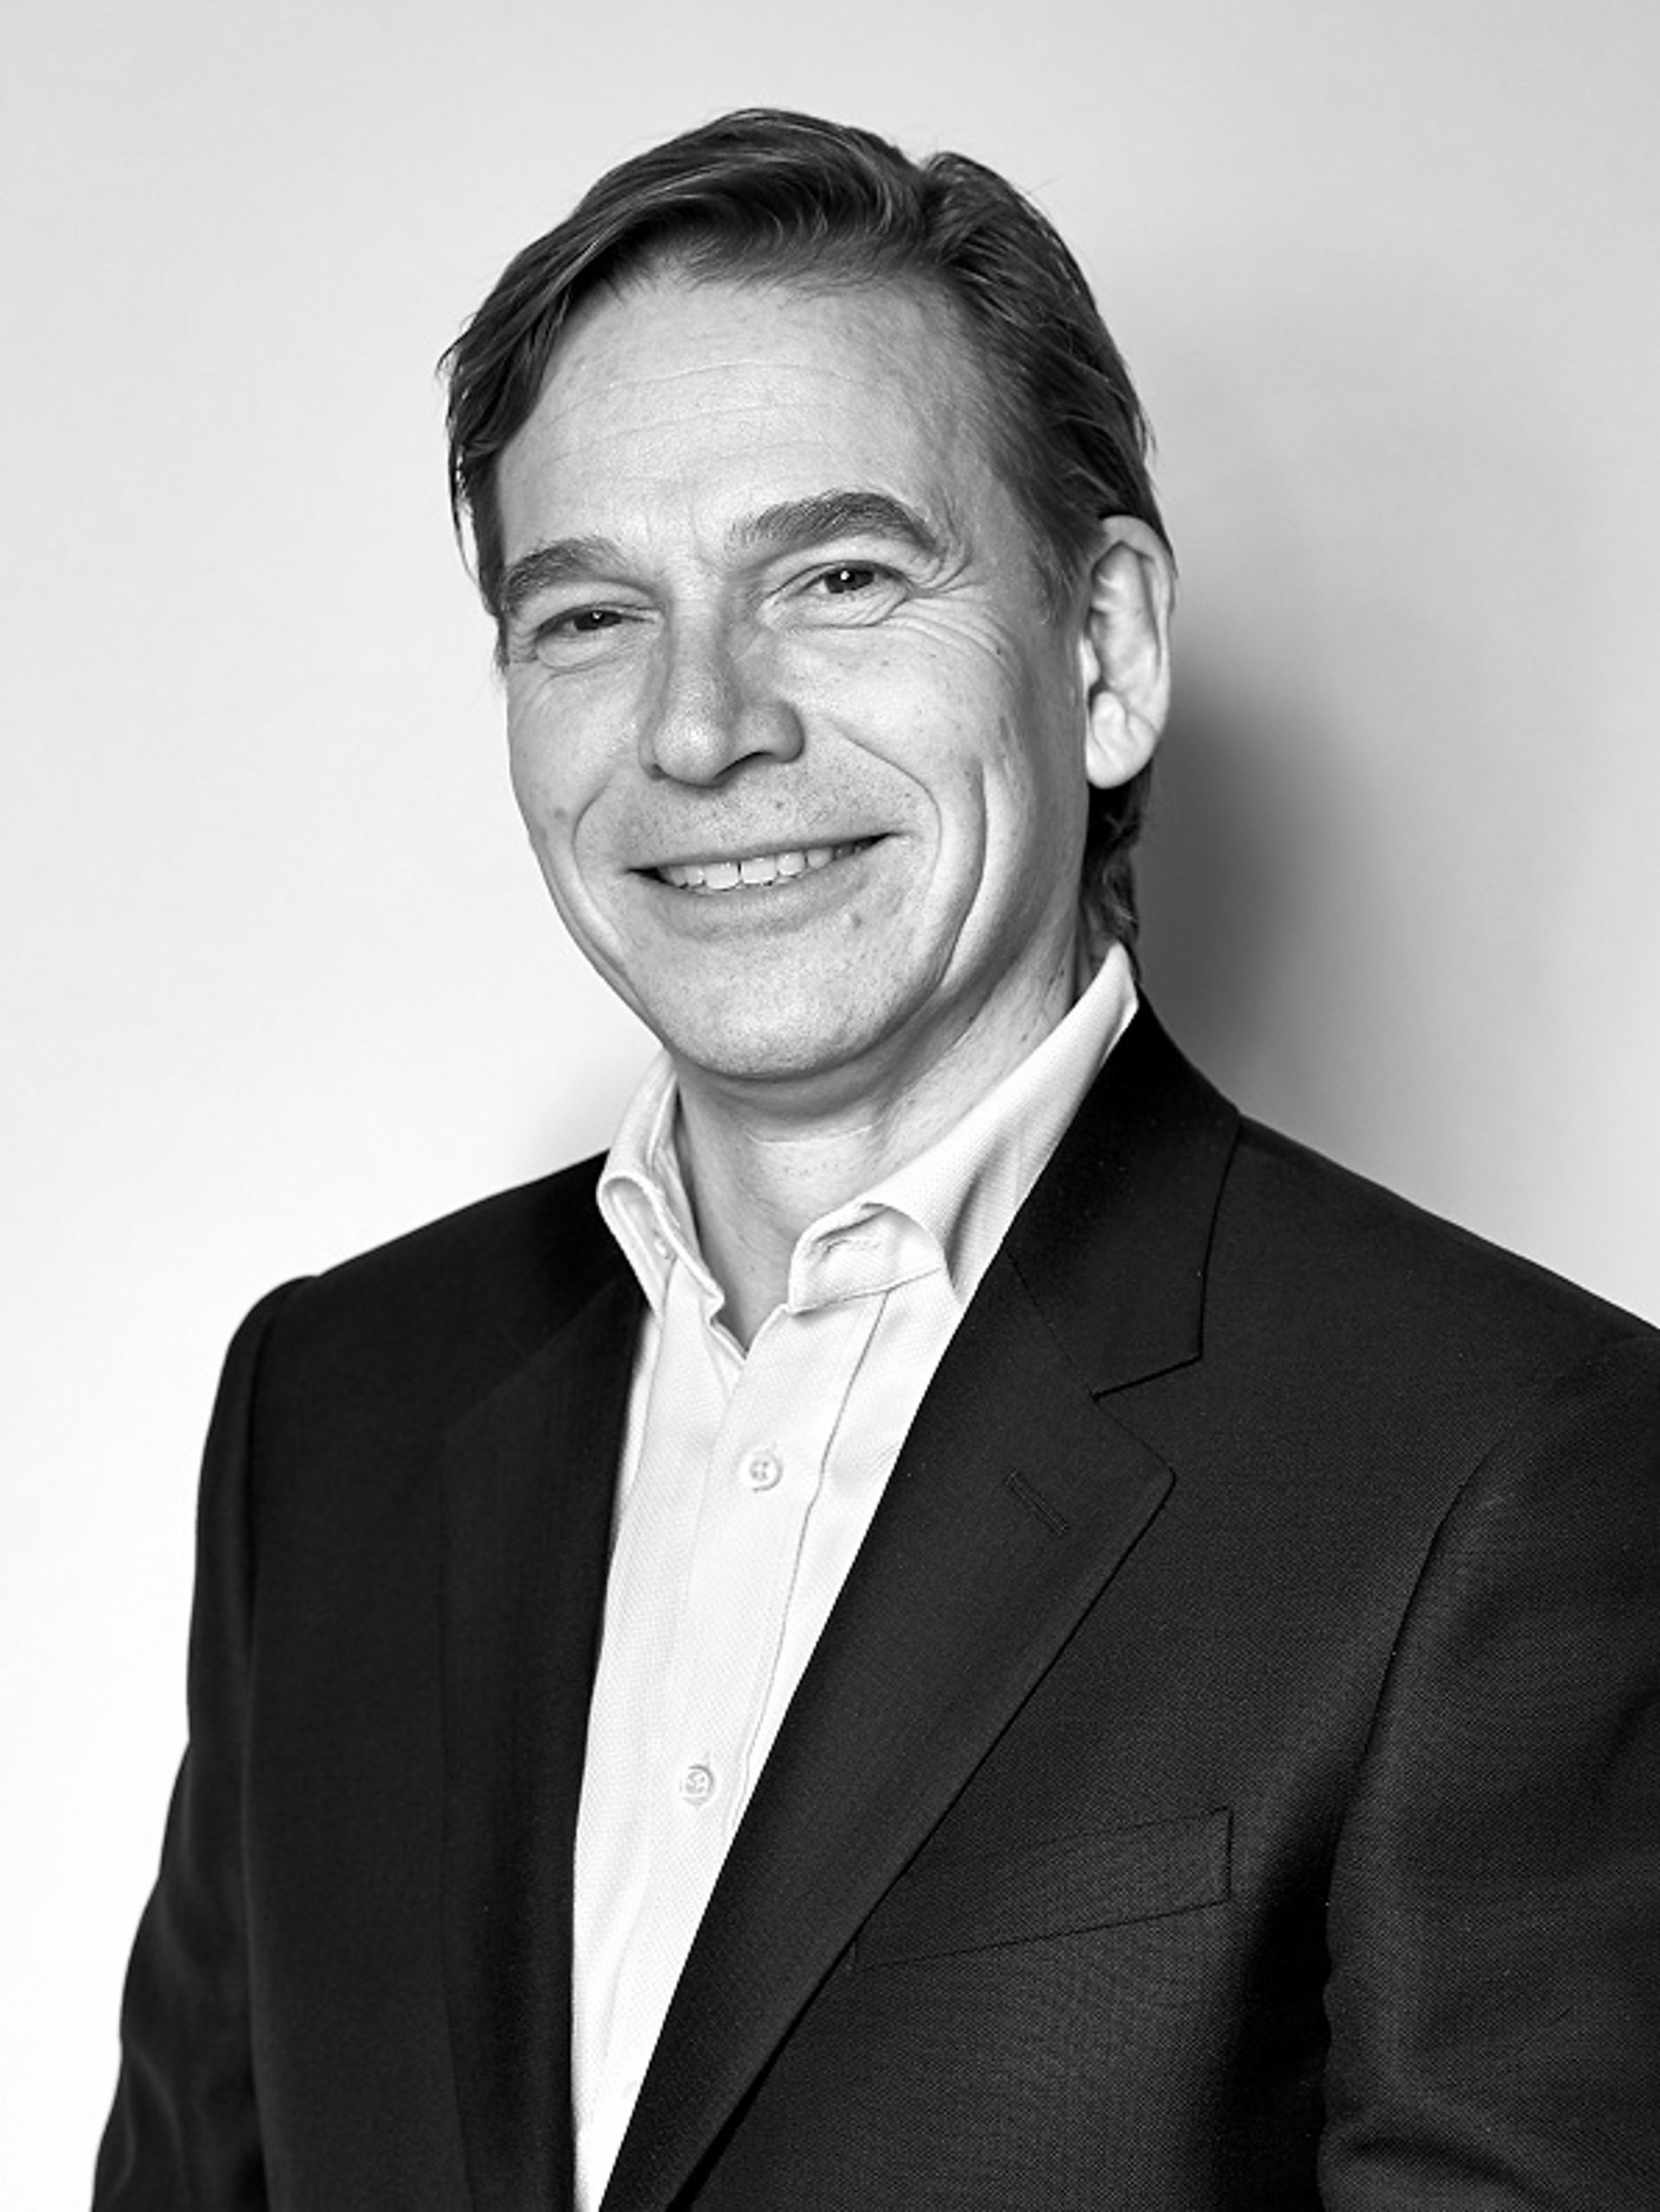 black and white portrait of  Christian Levin, Chief Executive Officer of TRATON SE and Chief Executive Officer Scania